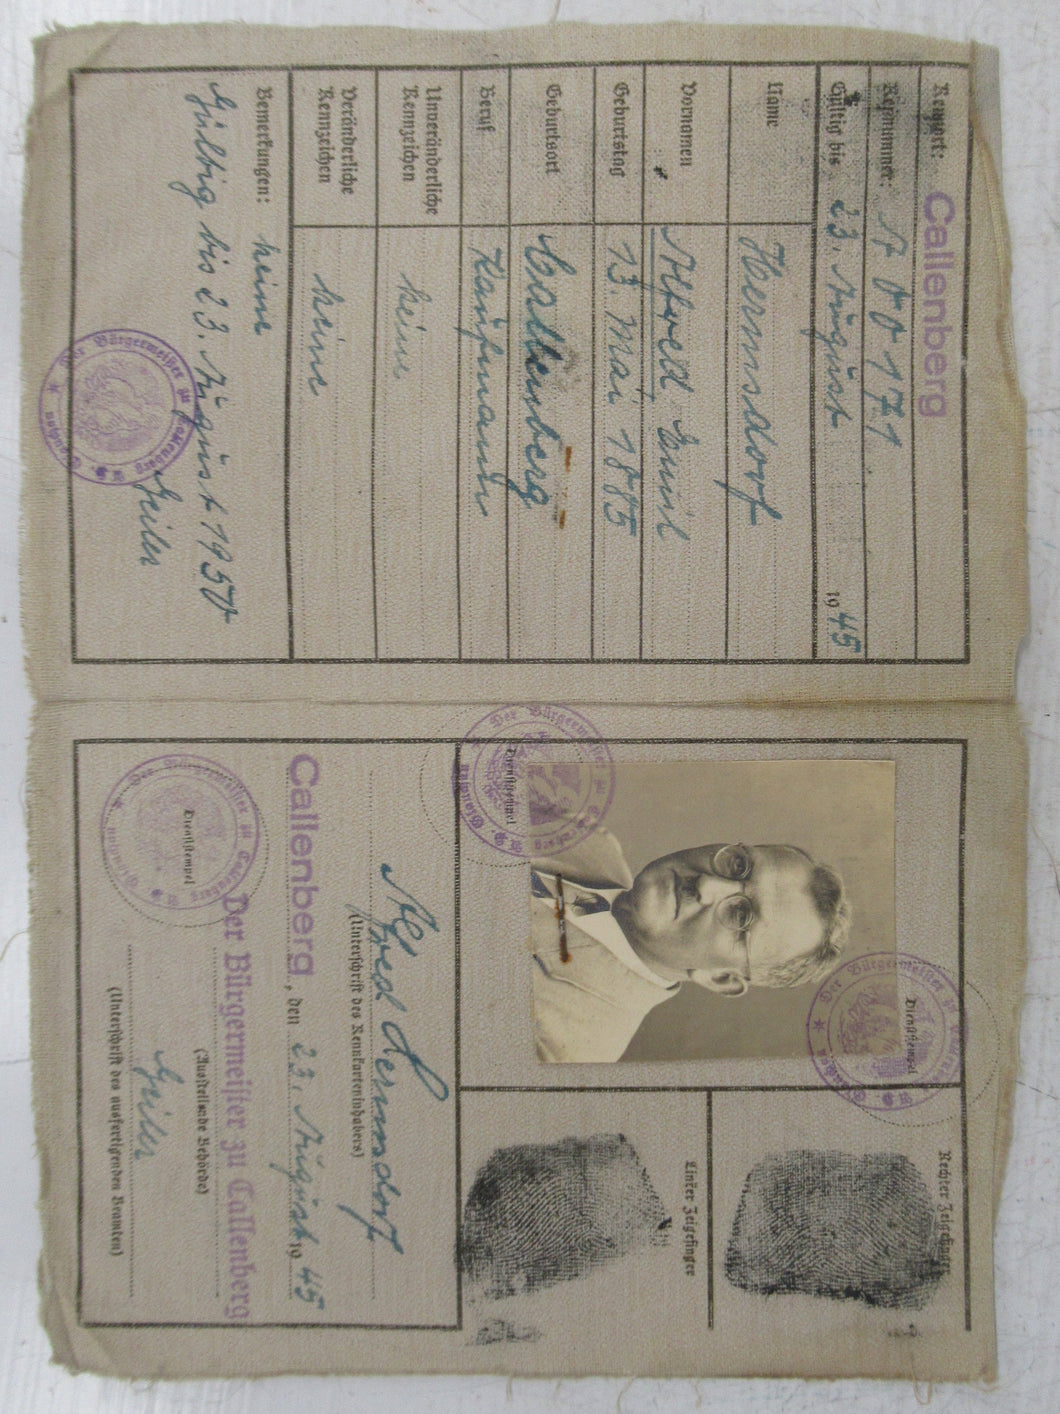 Kenncarte (iIdentification document) for Alfred Emil Hermsdorf